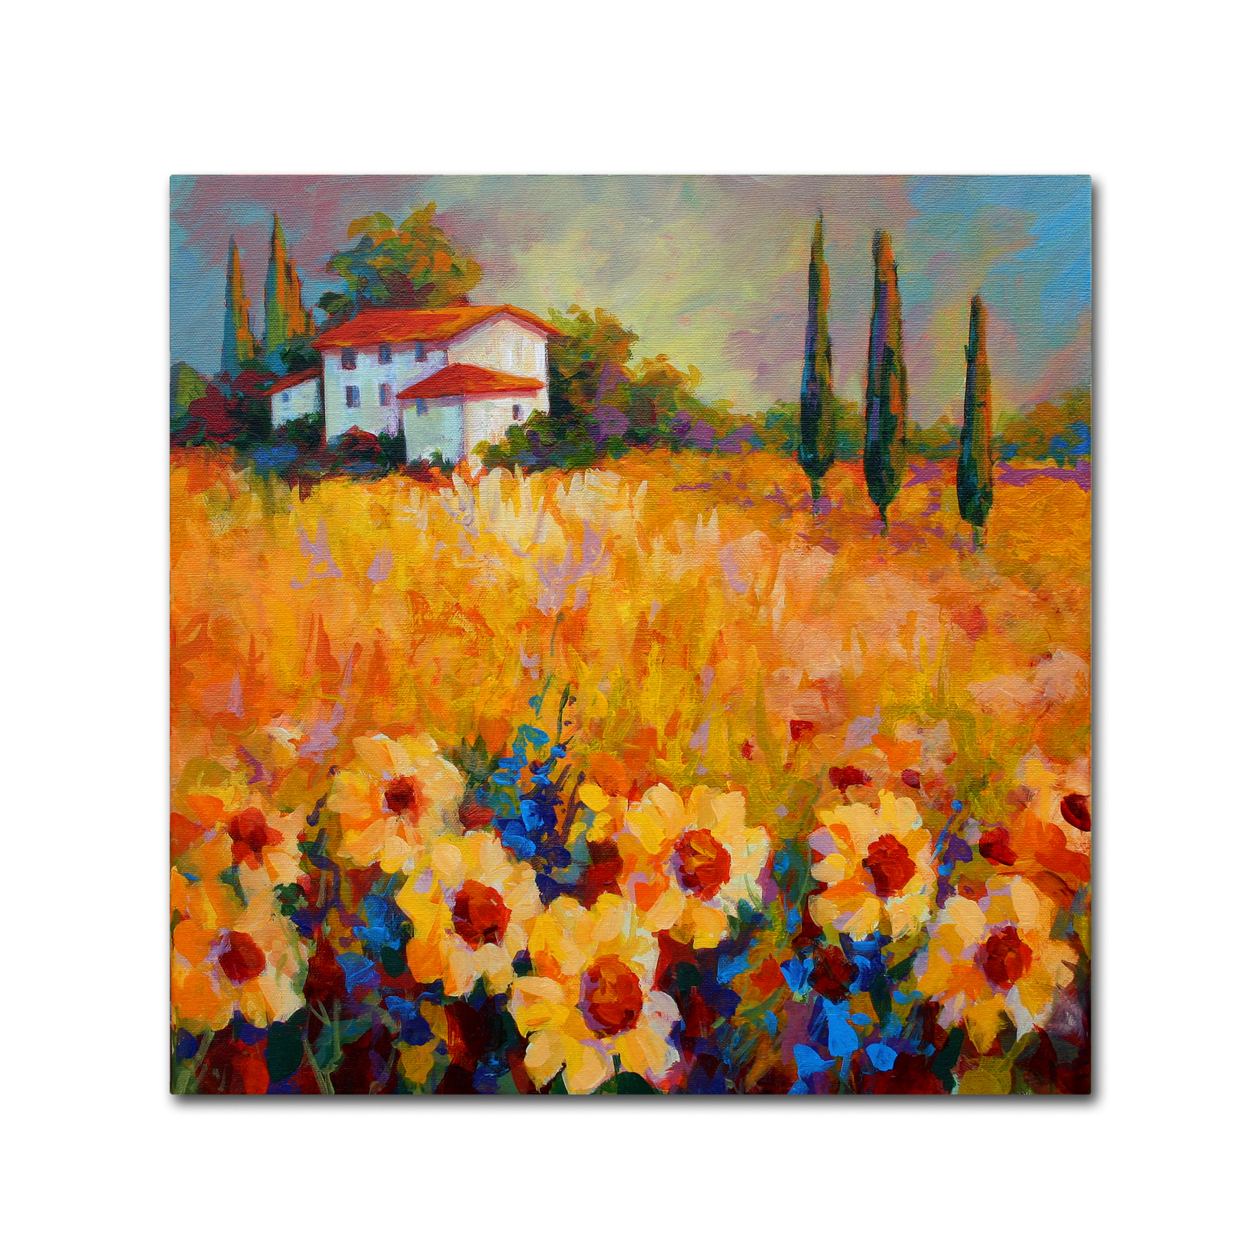 Marion Rose 'Tuscan Sunflowers' Ready To Hang Canvas Art 24 X 24 Inches Made In USA